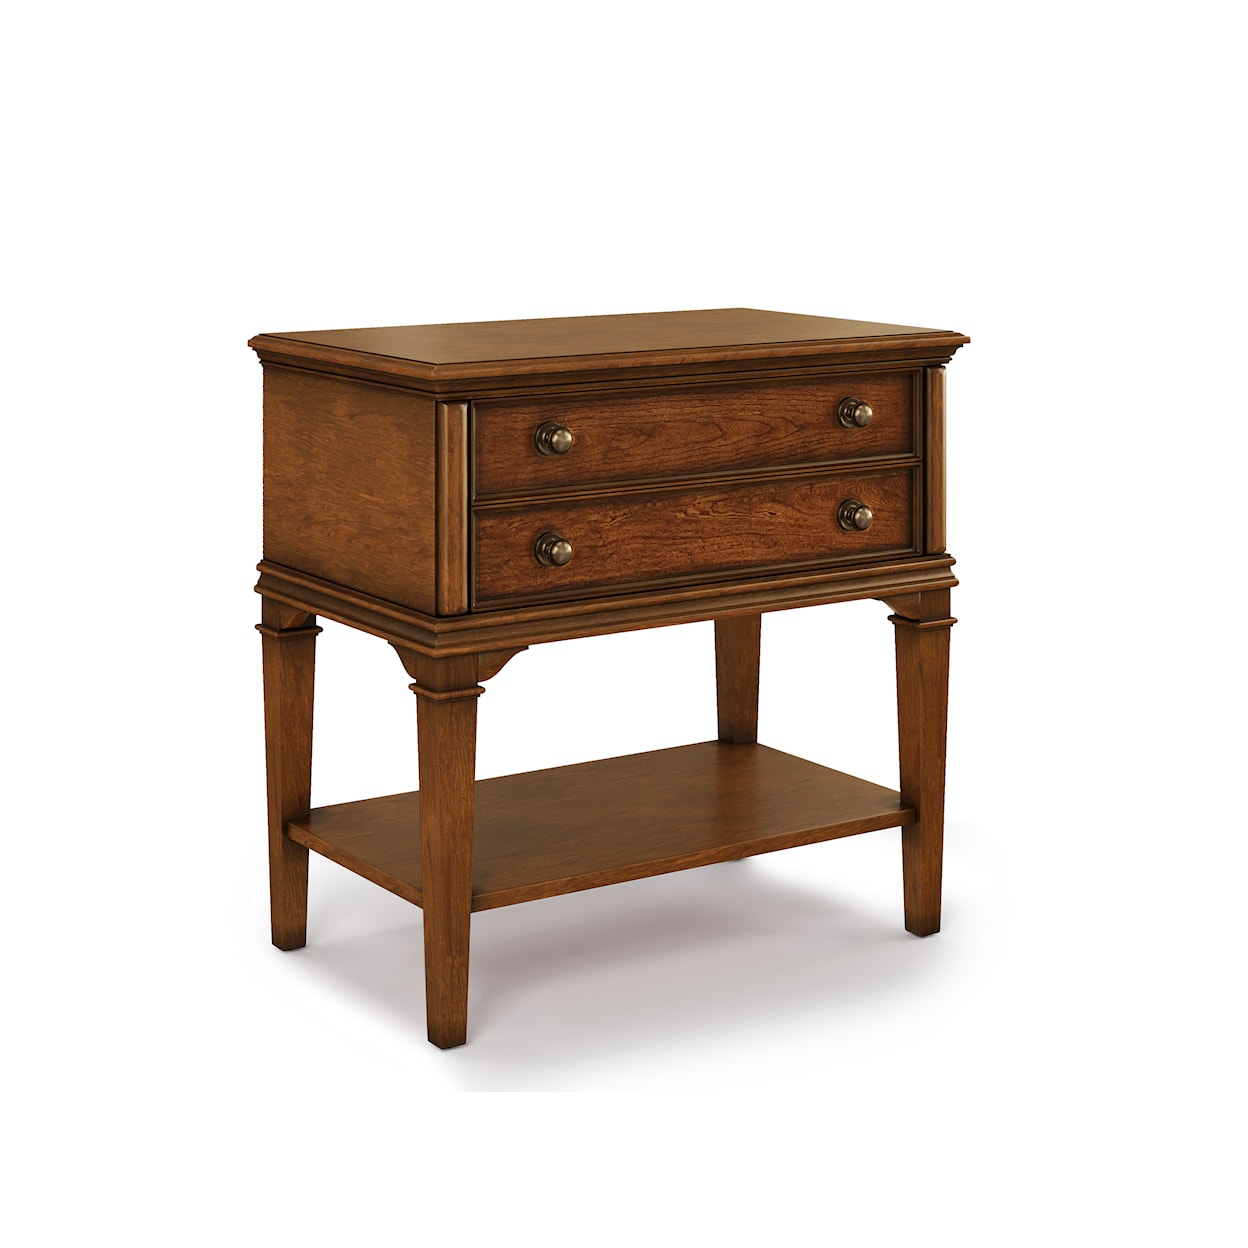 A.R.T. Furniture Inc Newel Nightstand - 1 Drawer With Storage